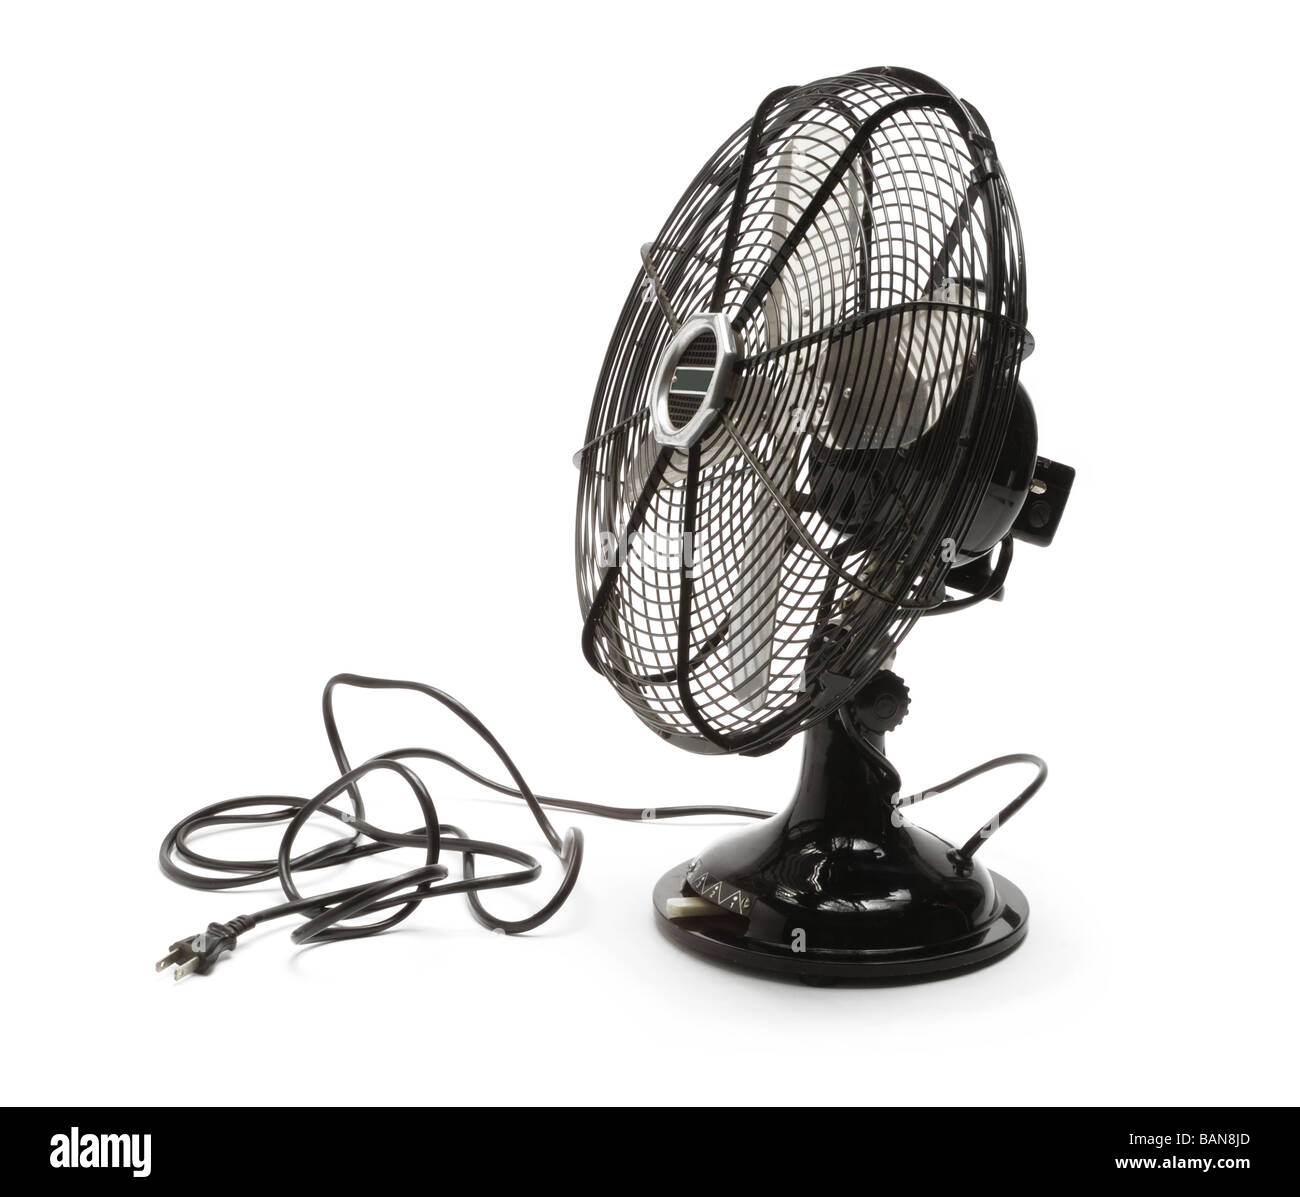 A metal desk fan with black cord and plug Stock Photo